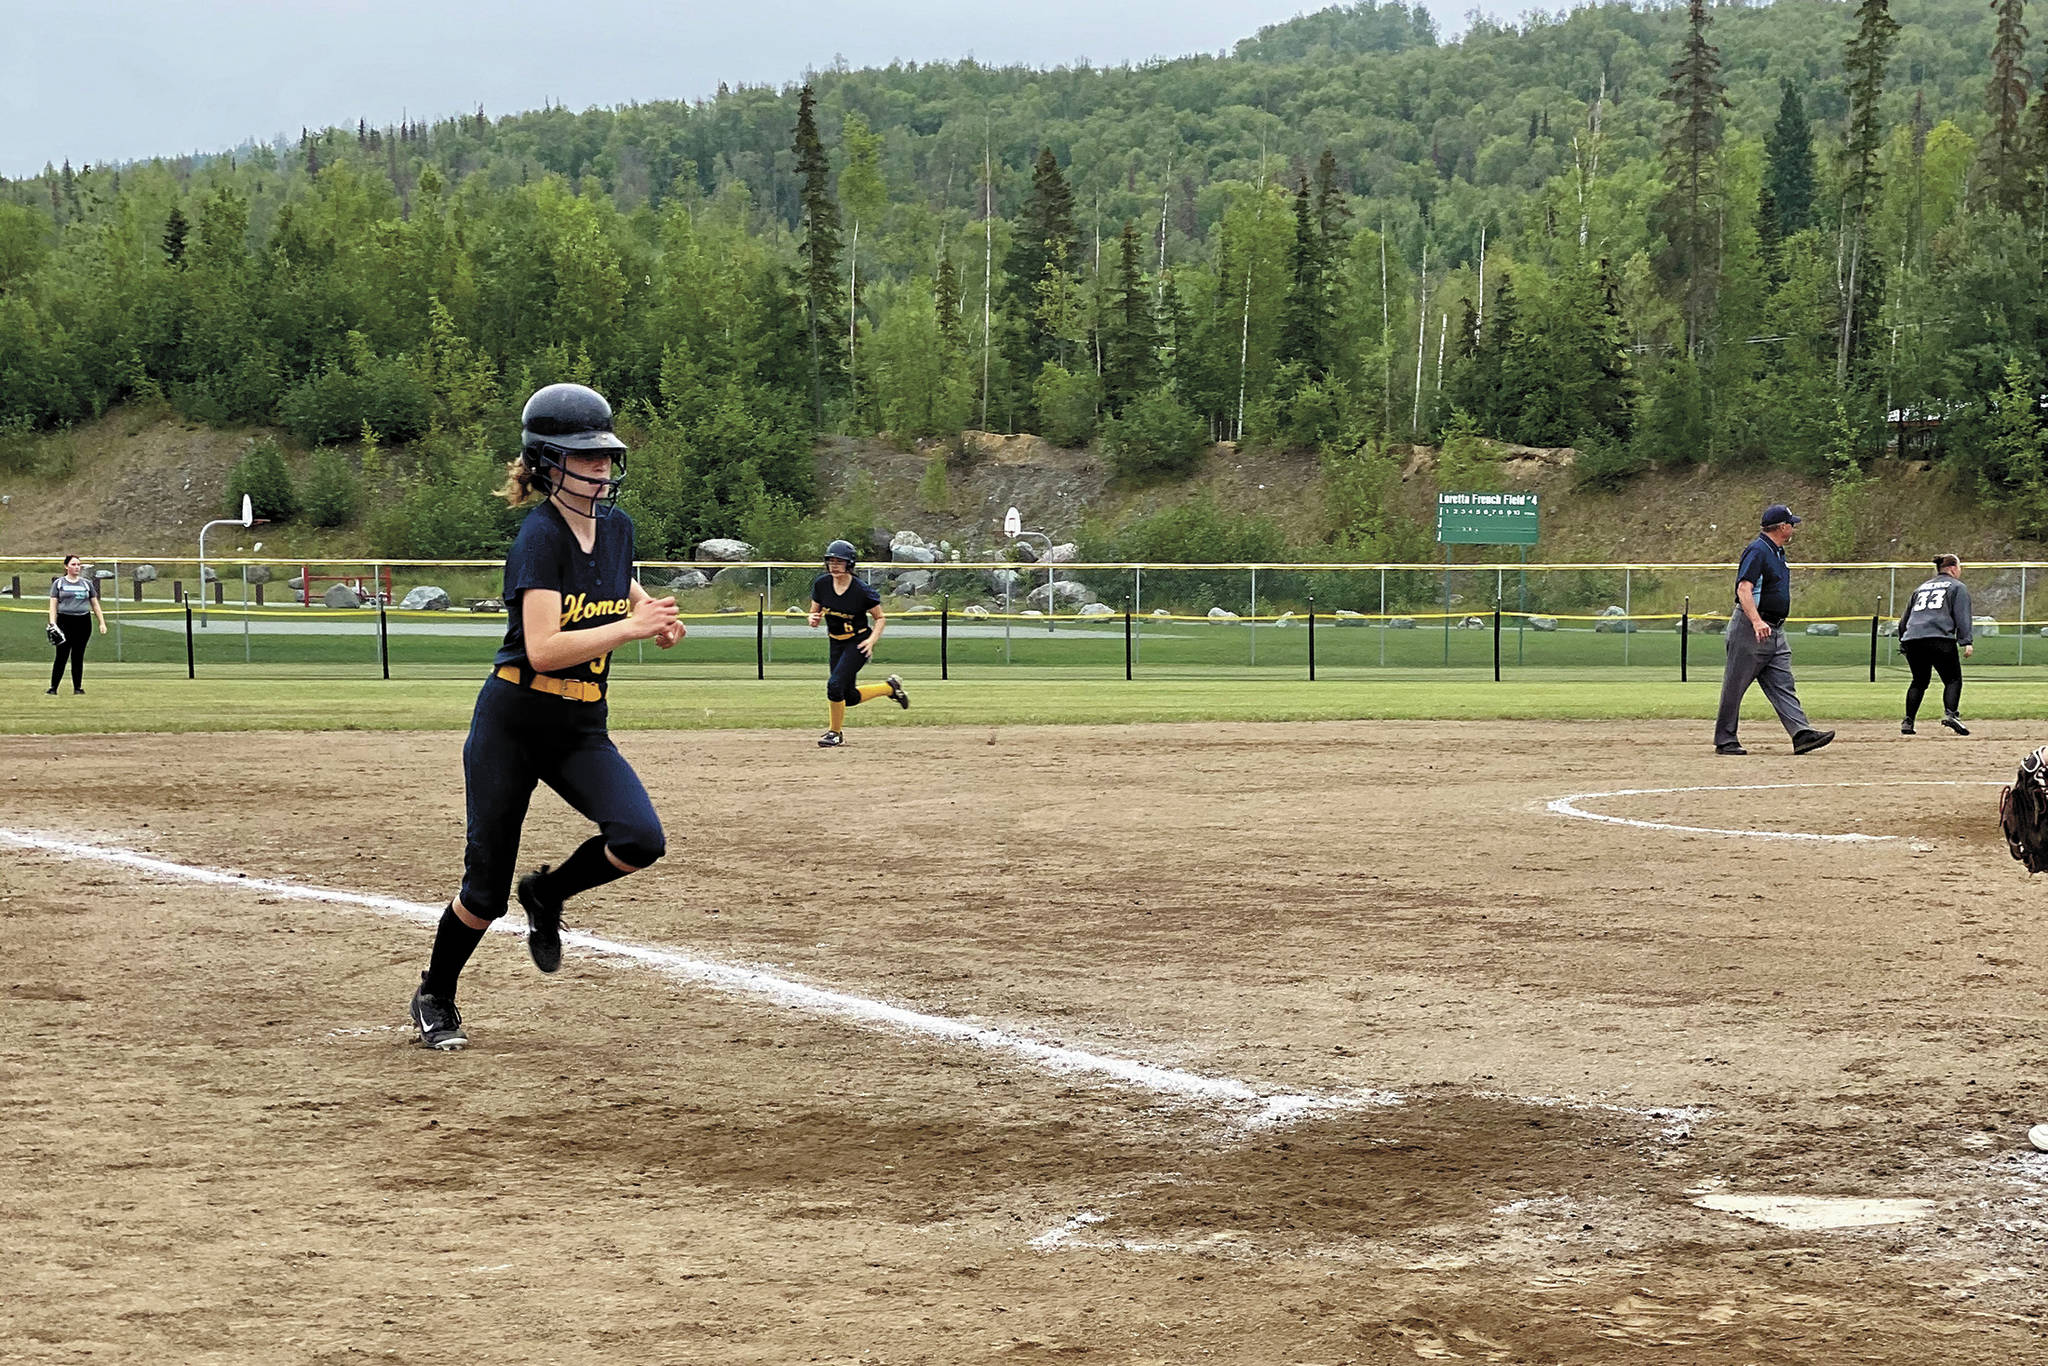 Kaylin Anderson makes a run during a state tournament for softball the weekend of Aug. 1-2, 2020 in Anchorage, Alaska. (Photo by Monica Anderson)